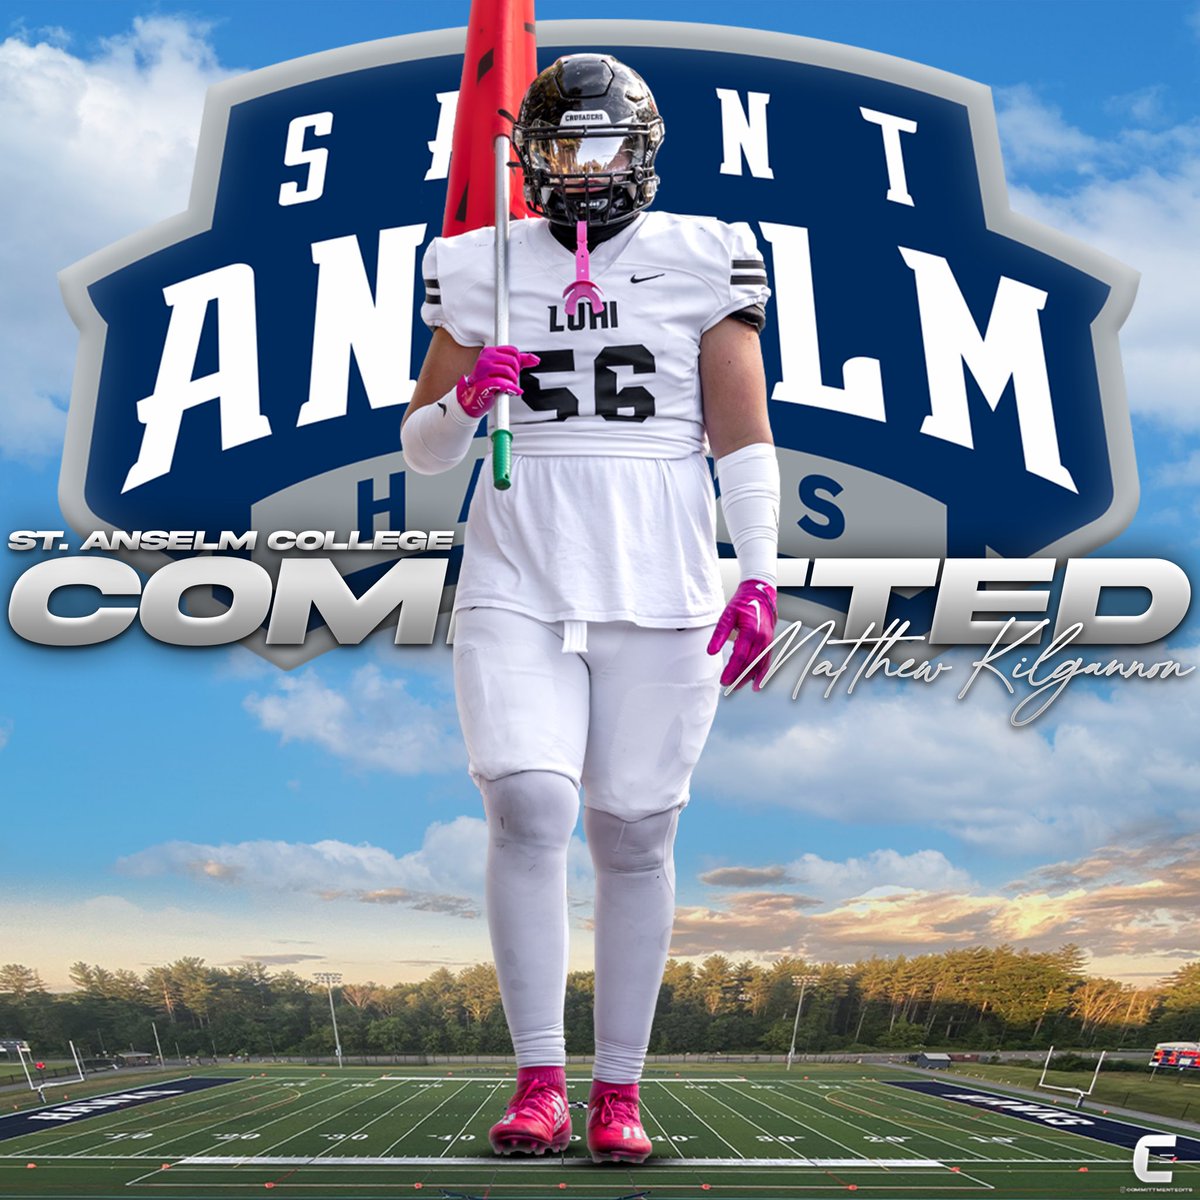 1000% Committed‼️ Excited to announce my commitment to St. Anselm College @CoachJoeAdam @Coach_Bick @CoachPriceFerg @LuHiFootball